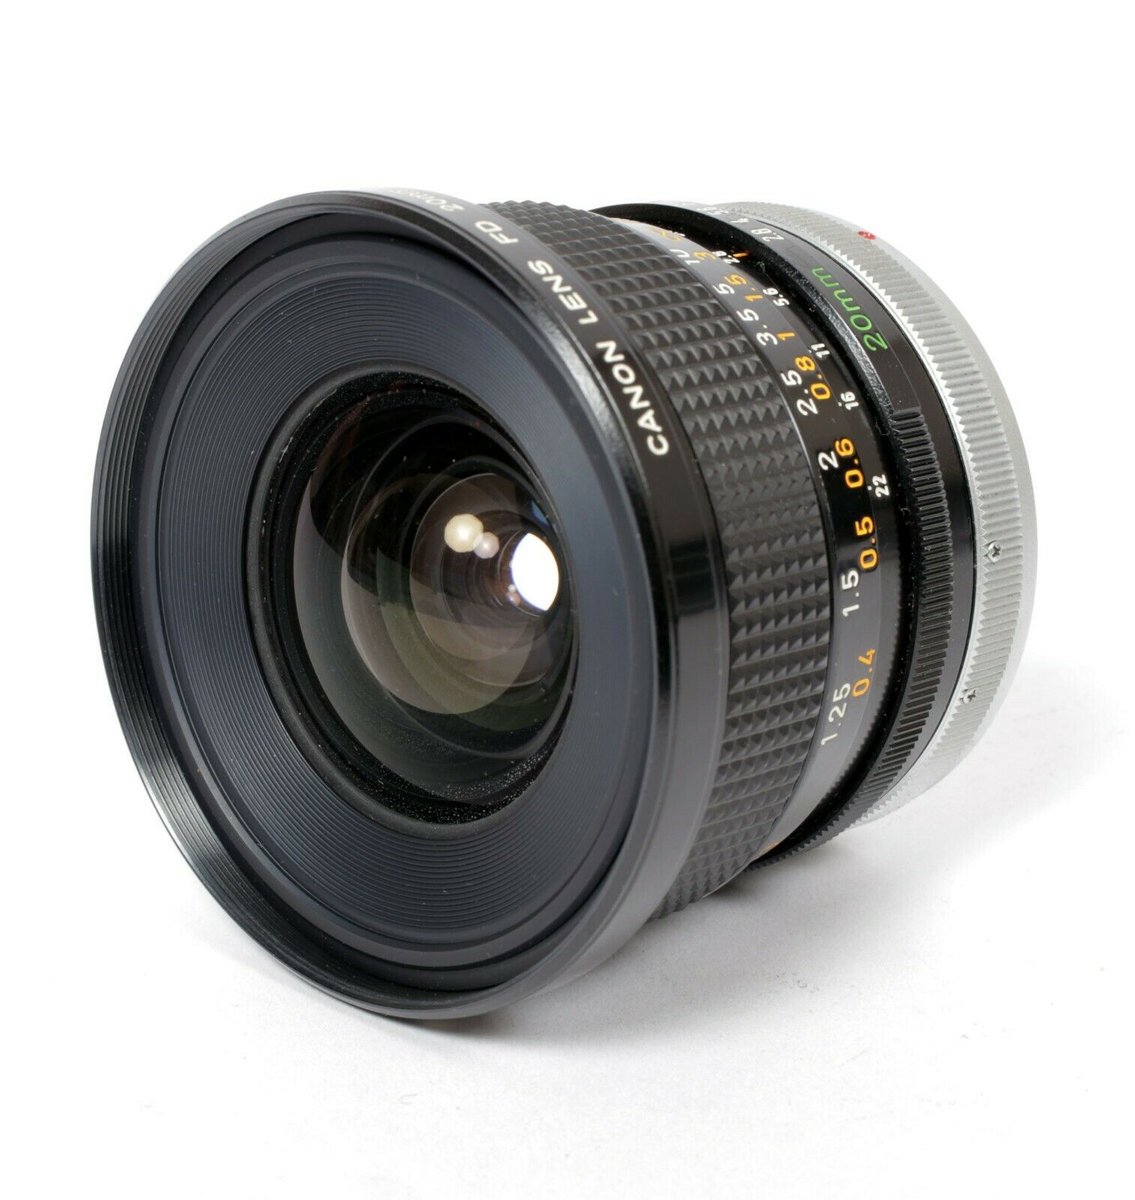 Canon FD 20mm F2.8 S.S.C. lens with caps